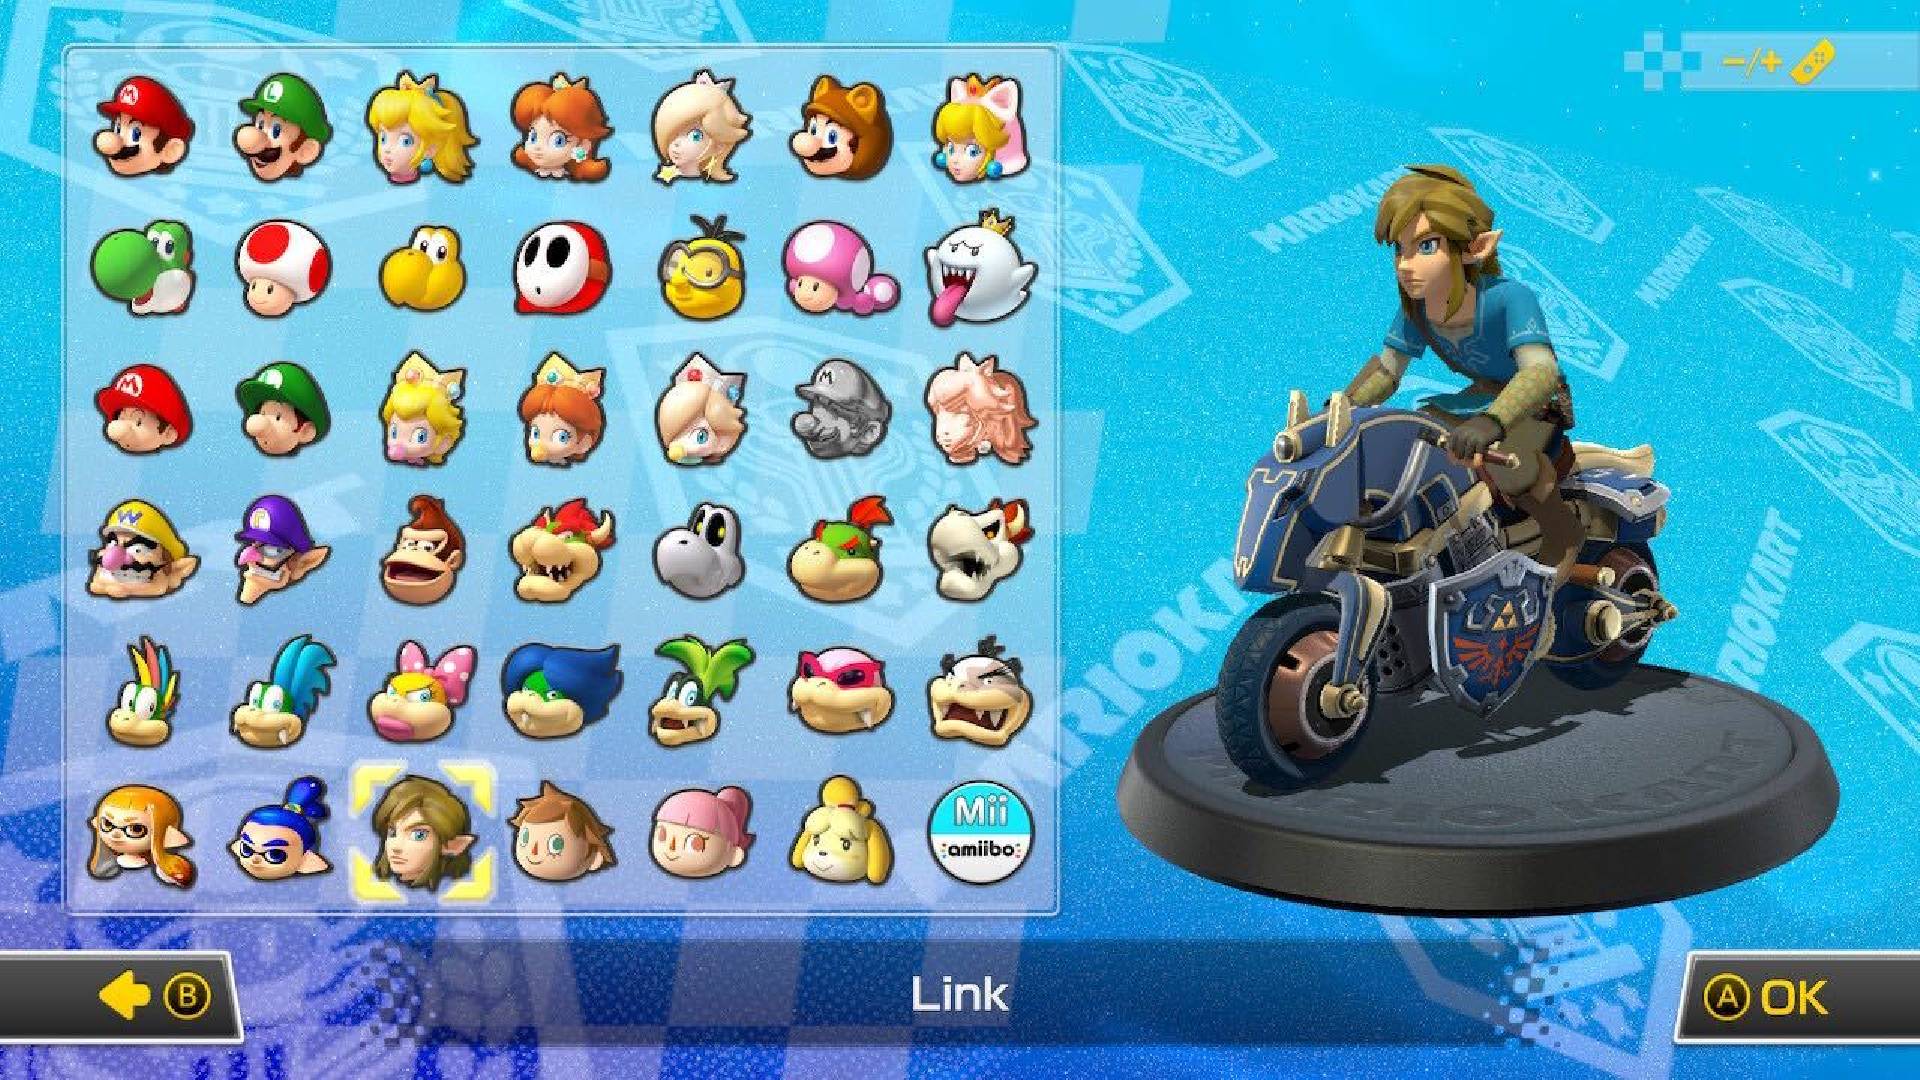 Link is visible on a character selection screen, sitting in a kart